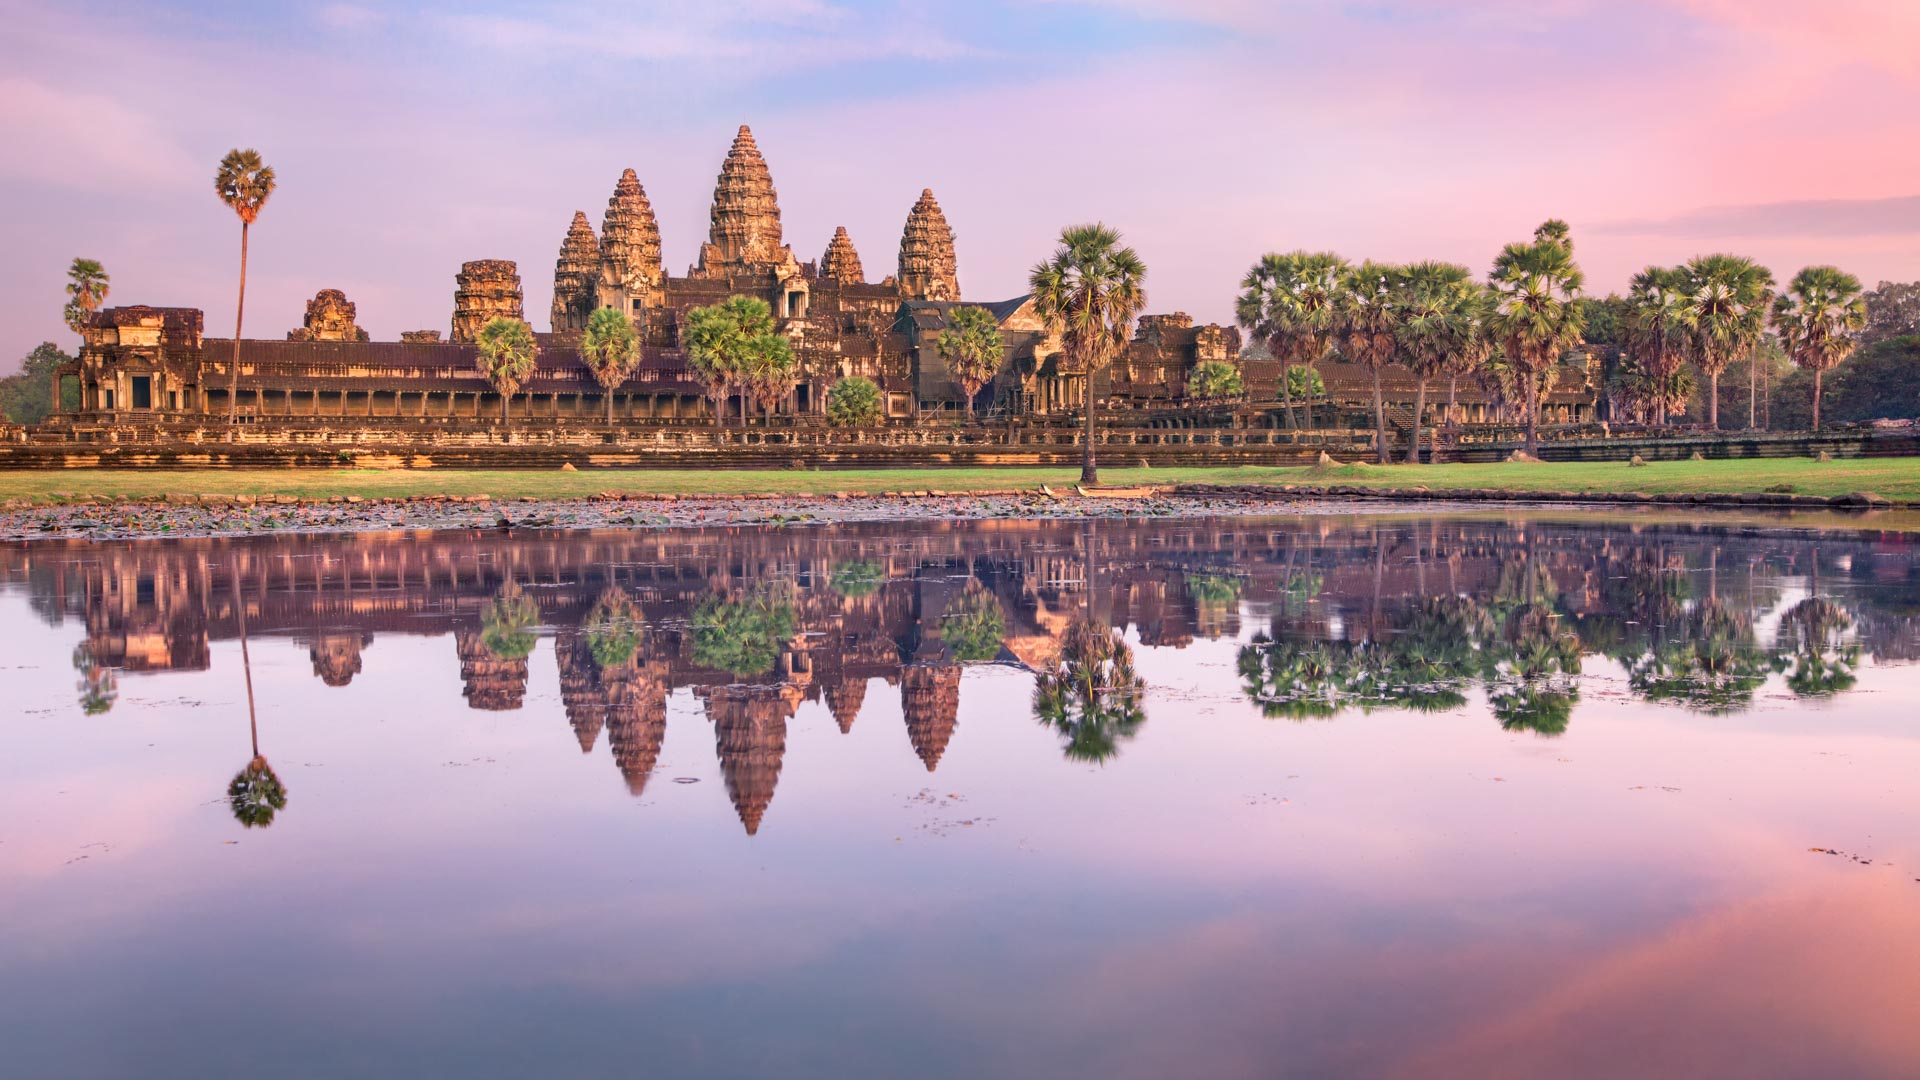 /fm/Files//Pictures/Ido Uploads/Asia/cambodia/All/Angkor Wat - Cambodia Wide Pink - NS - SS.jpg